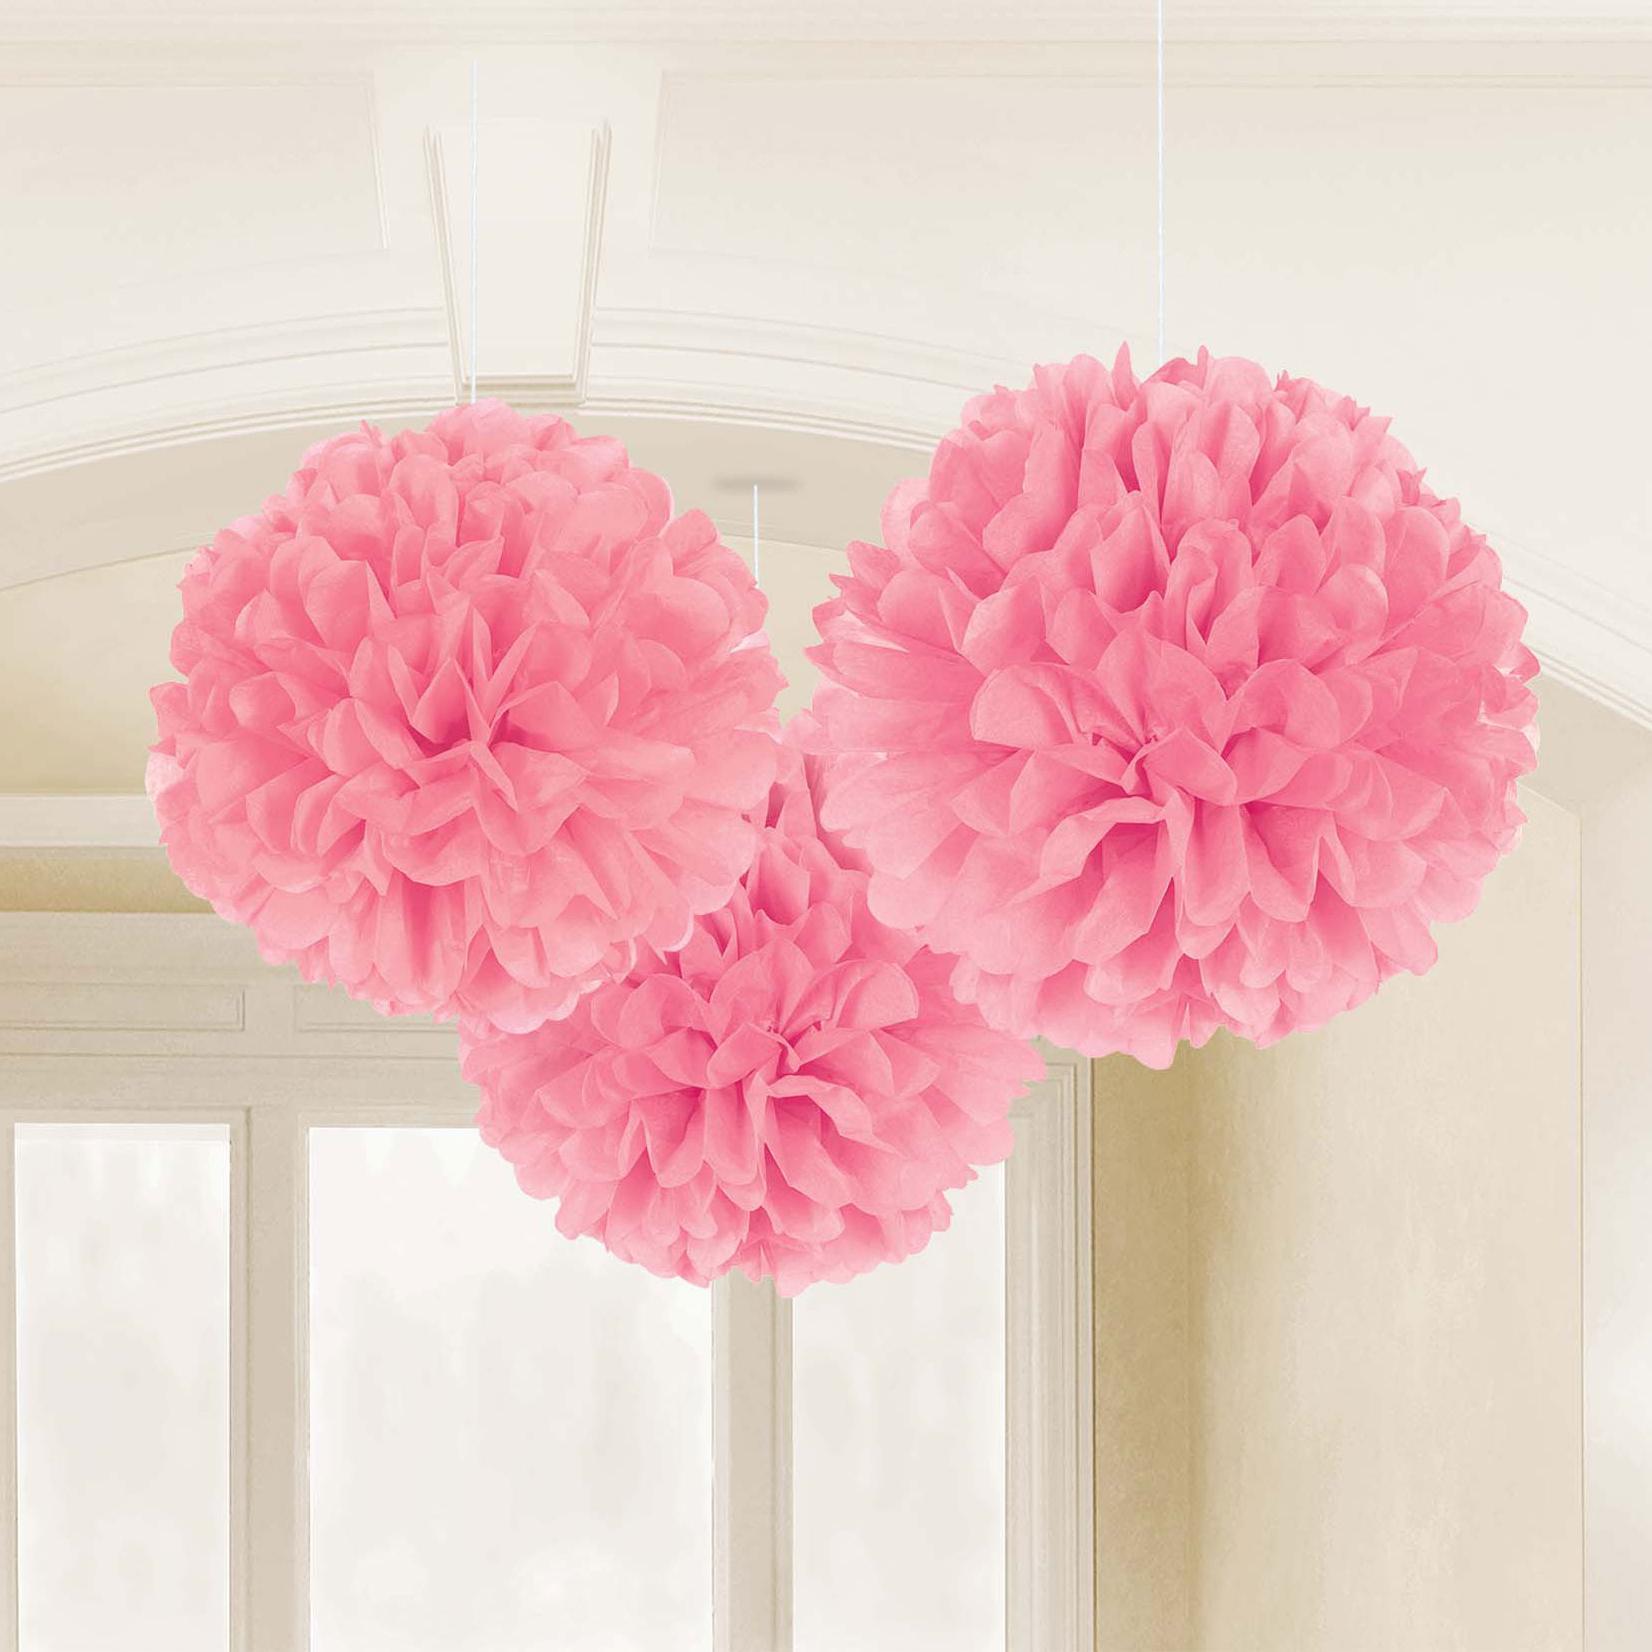 New Pink Fluffy Decorations Tissue Paper 3pcs Decorations - Party Centre